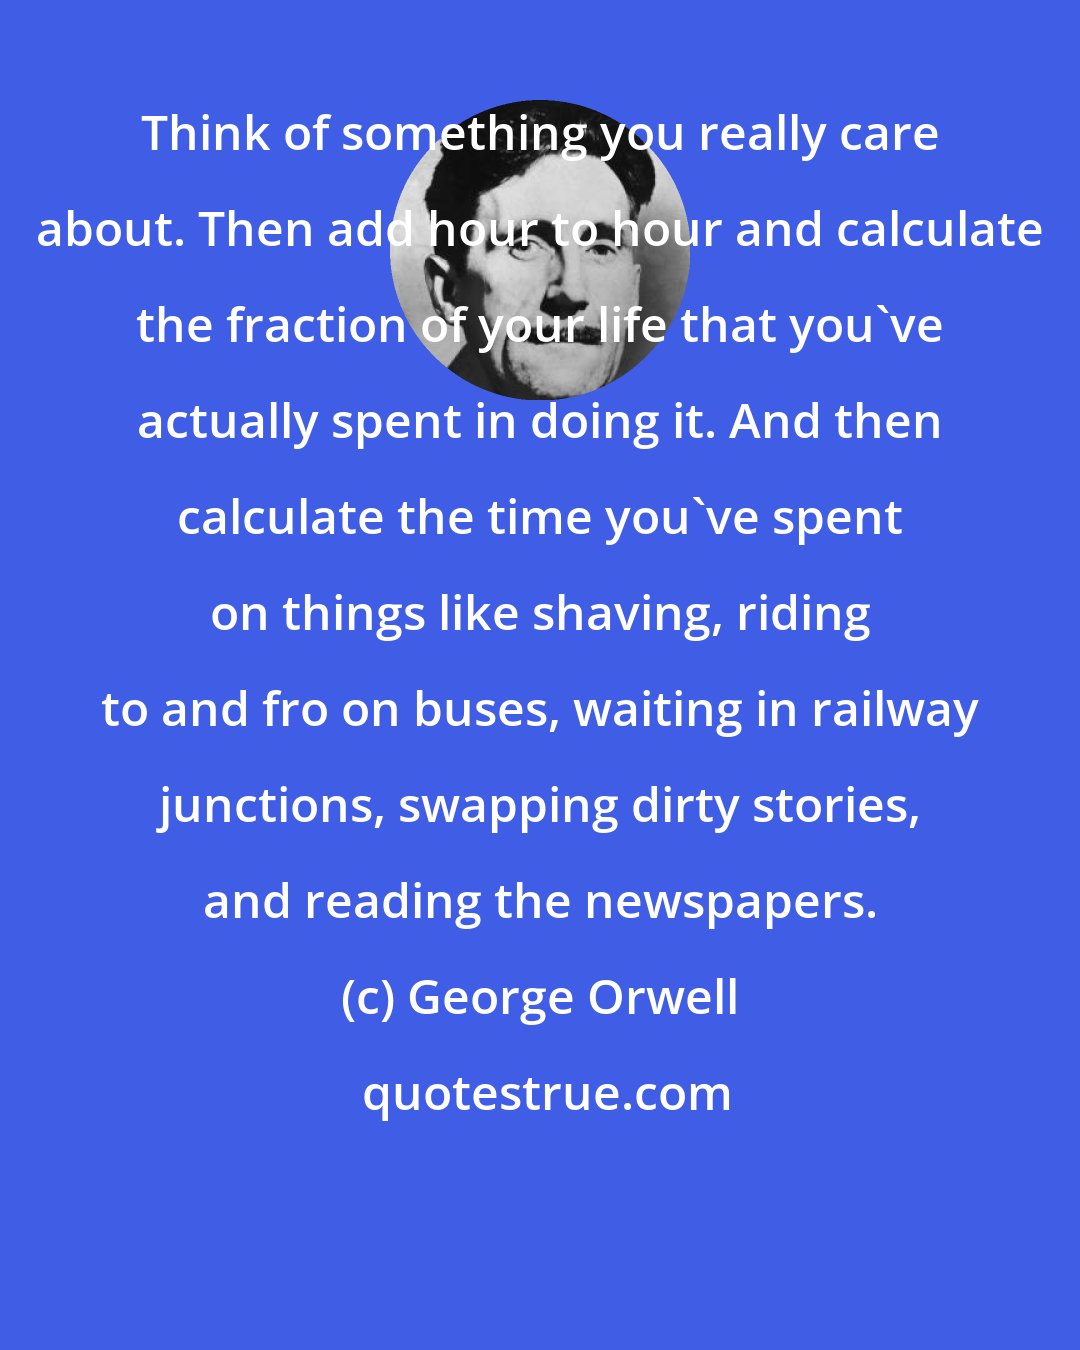 George Orwell: Think of something you really care about. Then add hour to hour and calculate the fraction of your life that you've actually spent in doing it. And then calculate the time you've spent on things like shaving, riding to and fro on buses, waiting in railway junctions, swapping dirty stories, and reading the newspapers.